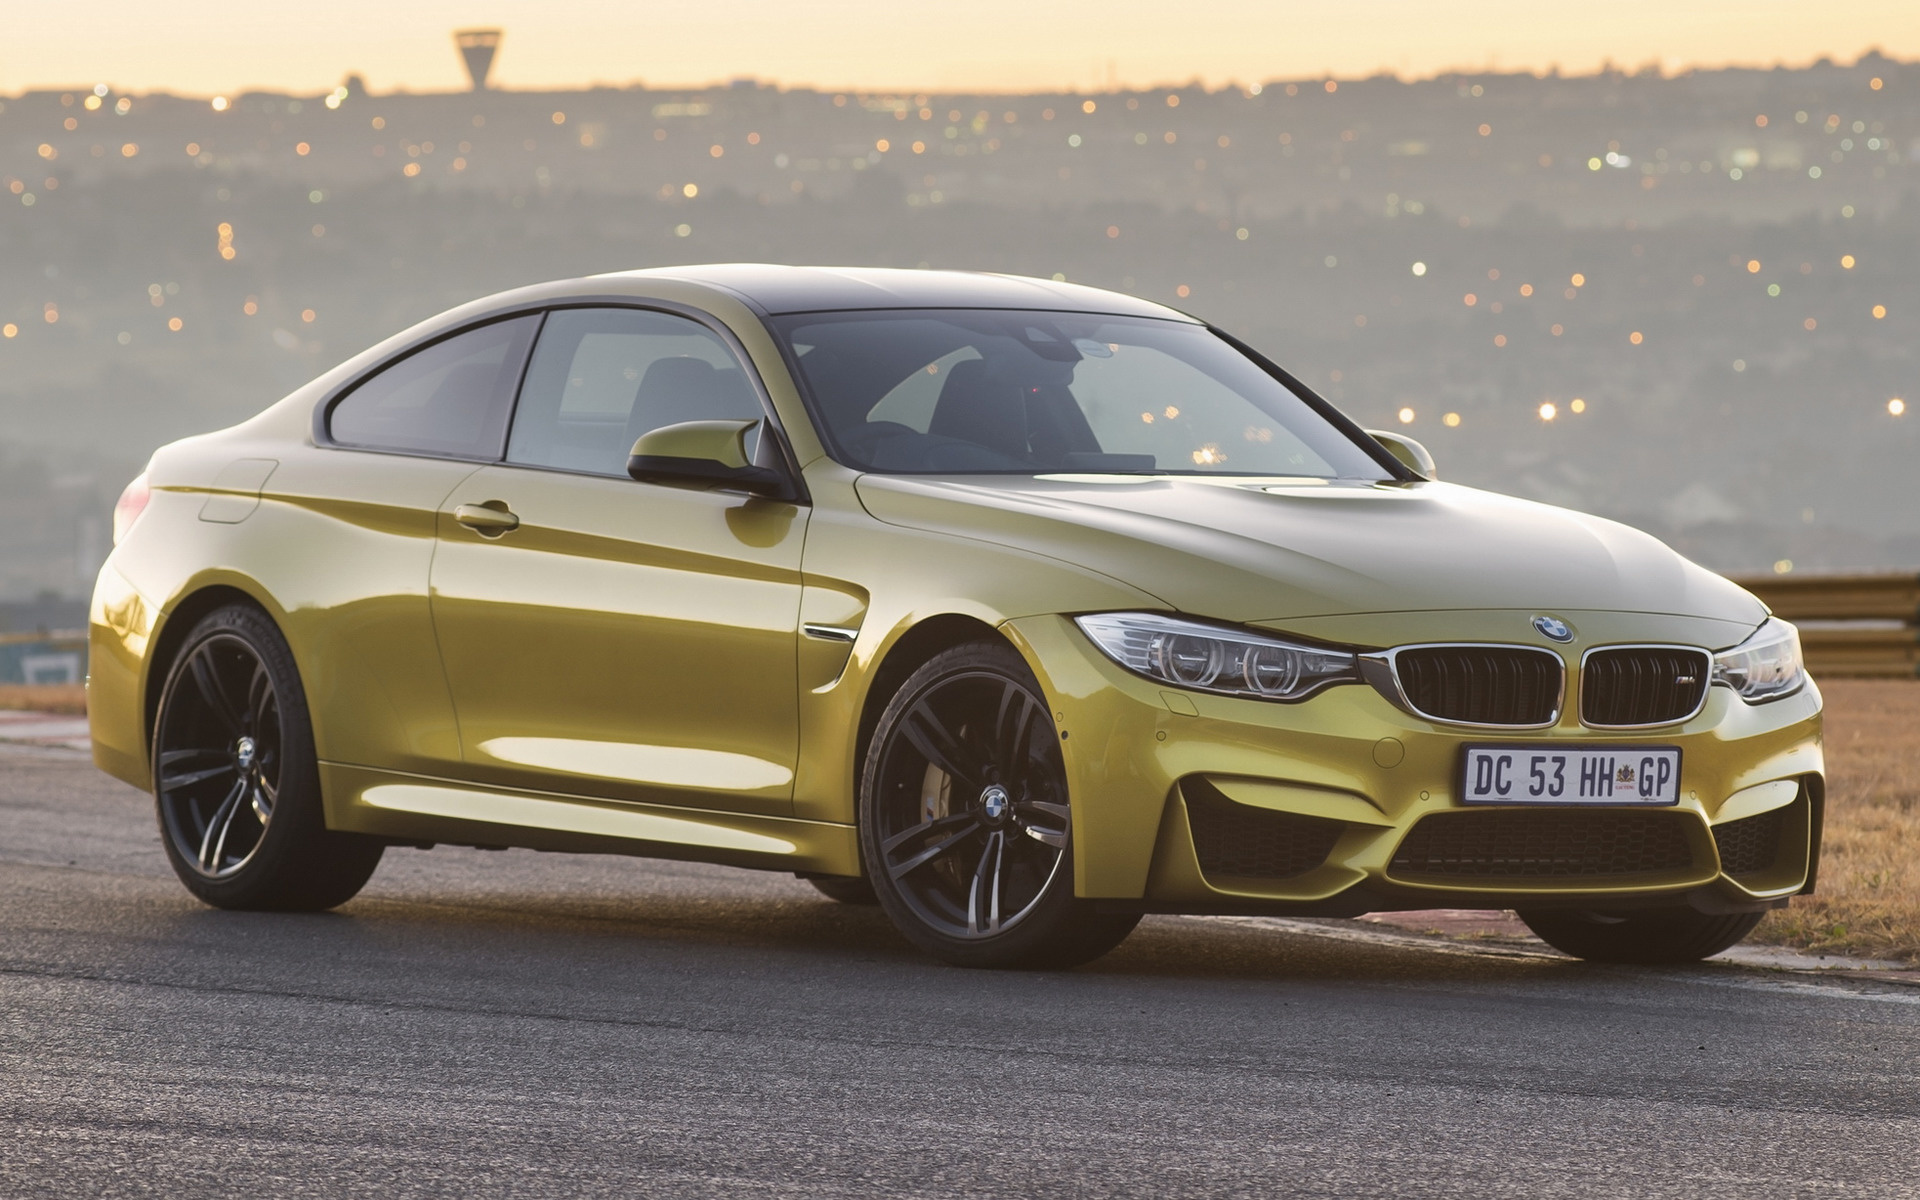 Bmw m4 coupe. BMW m4 Coupe 2014. BMW m4 2014 купе. BMW m4 f82 2014. 2014 BMW m4 Coupe (f82).